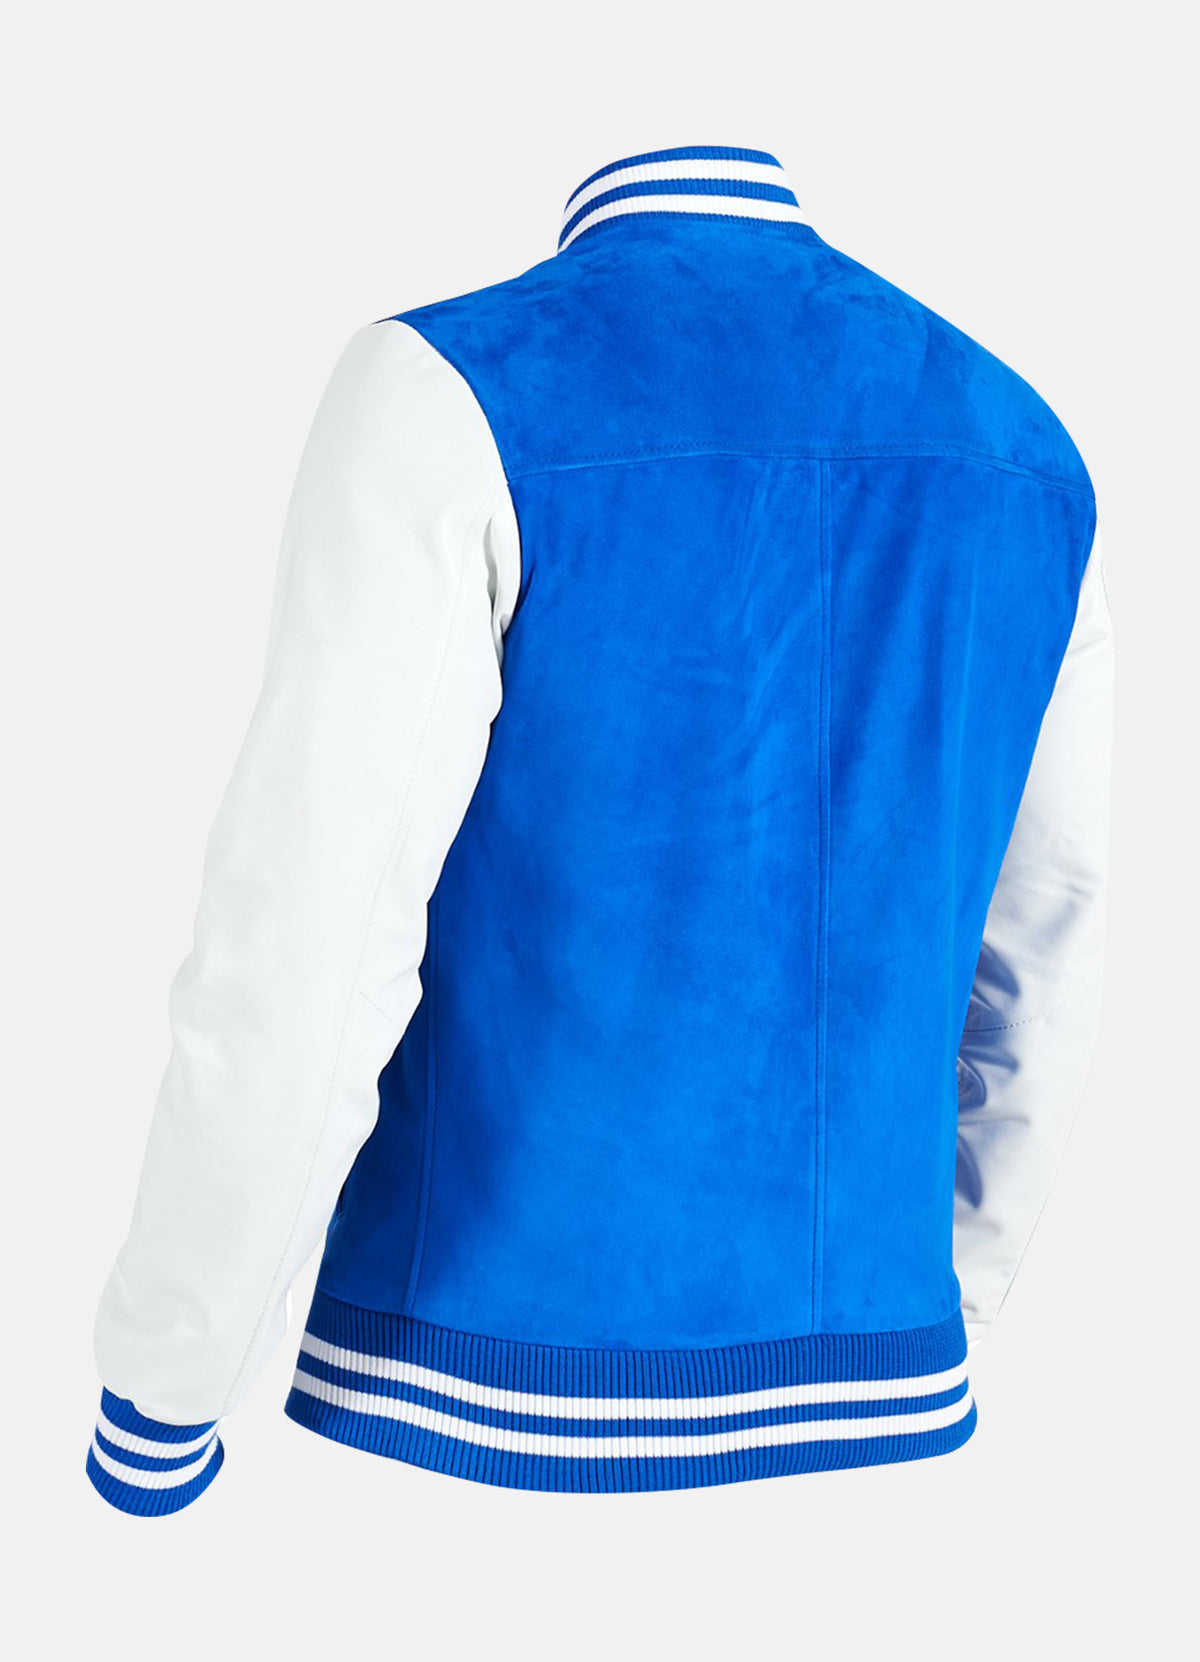 Mens Blue and White Varsity Jacket | Get Free Shipping!